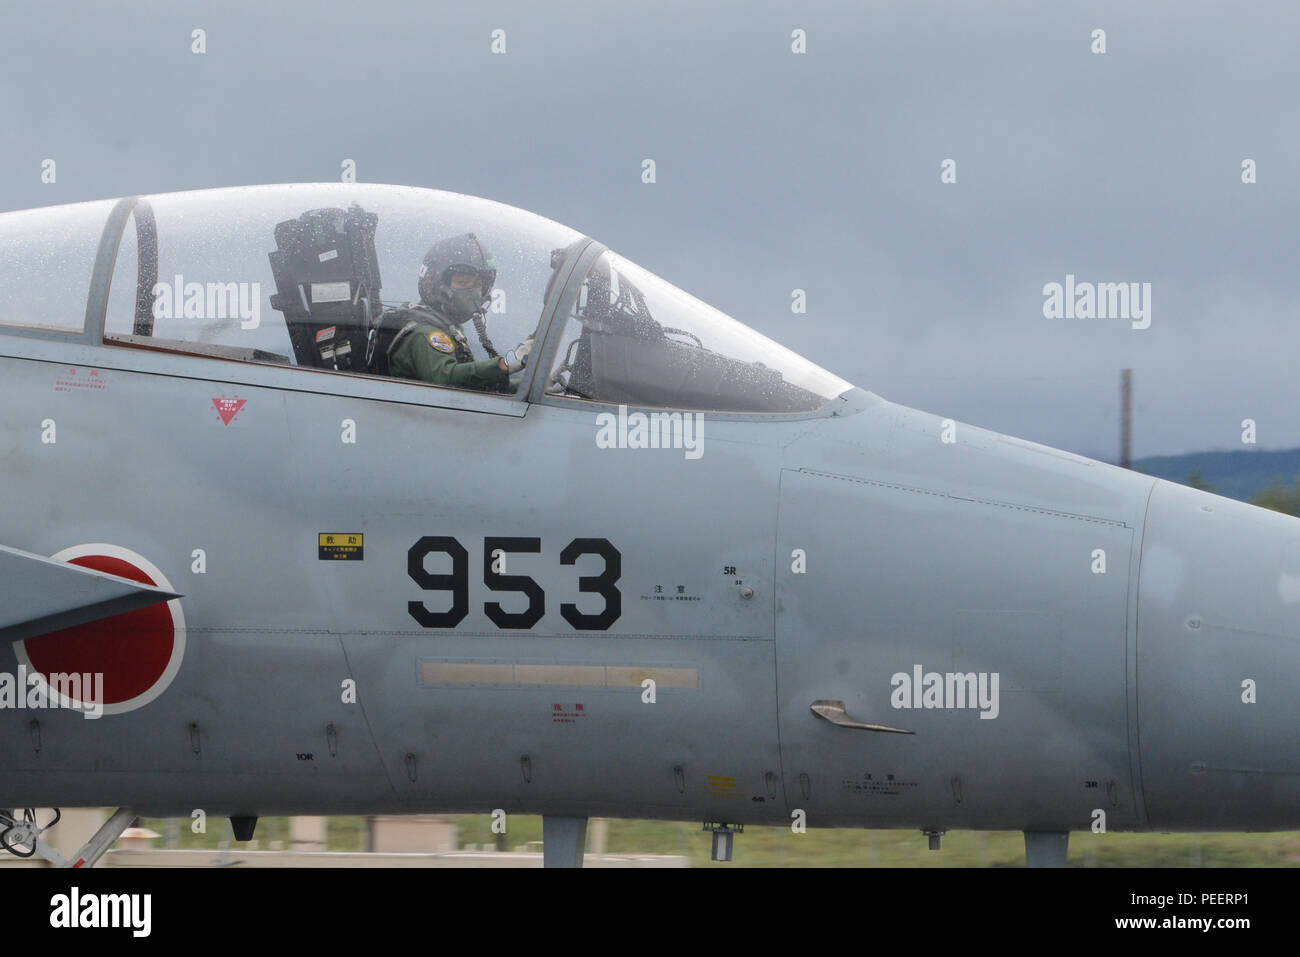 A Japanese Air Self-Defense Force F-15J Eagle pilot taxis at Eielson Air Force Base, Alaska, Aug. 10, 2015, during Red Flag-Alaska (RF-A) 15-3. RF-A is a series of Pacific Air Forces commander-directed field training exercises for U.S. and partner nation forces, providing combined offensive counter-air, interdiction, close air support and large force employment training in a simulated combat environment. (U.S. Air Force photo by Senior Airman Ashley Nicole Taylor/Released) Stock Photo